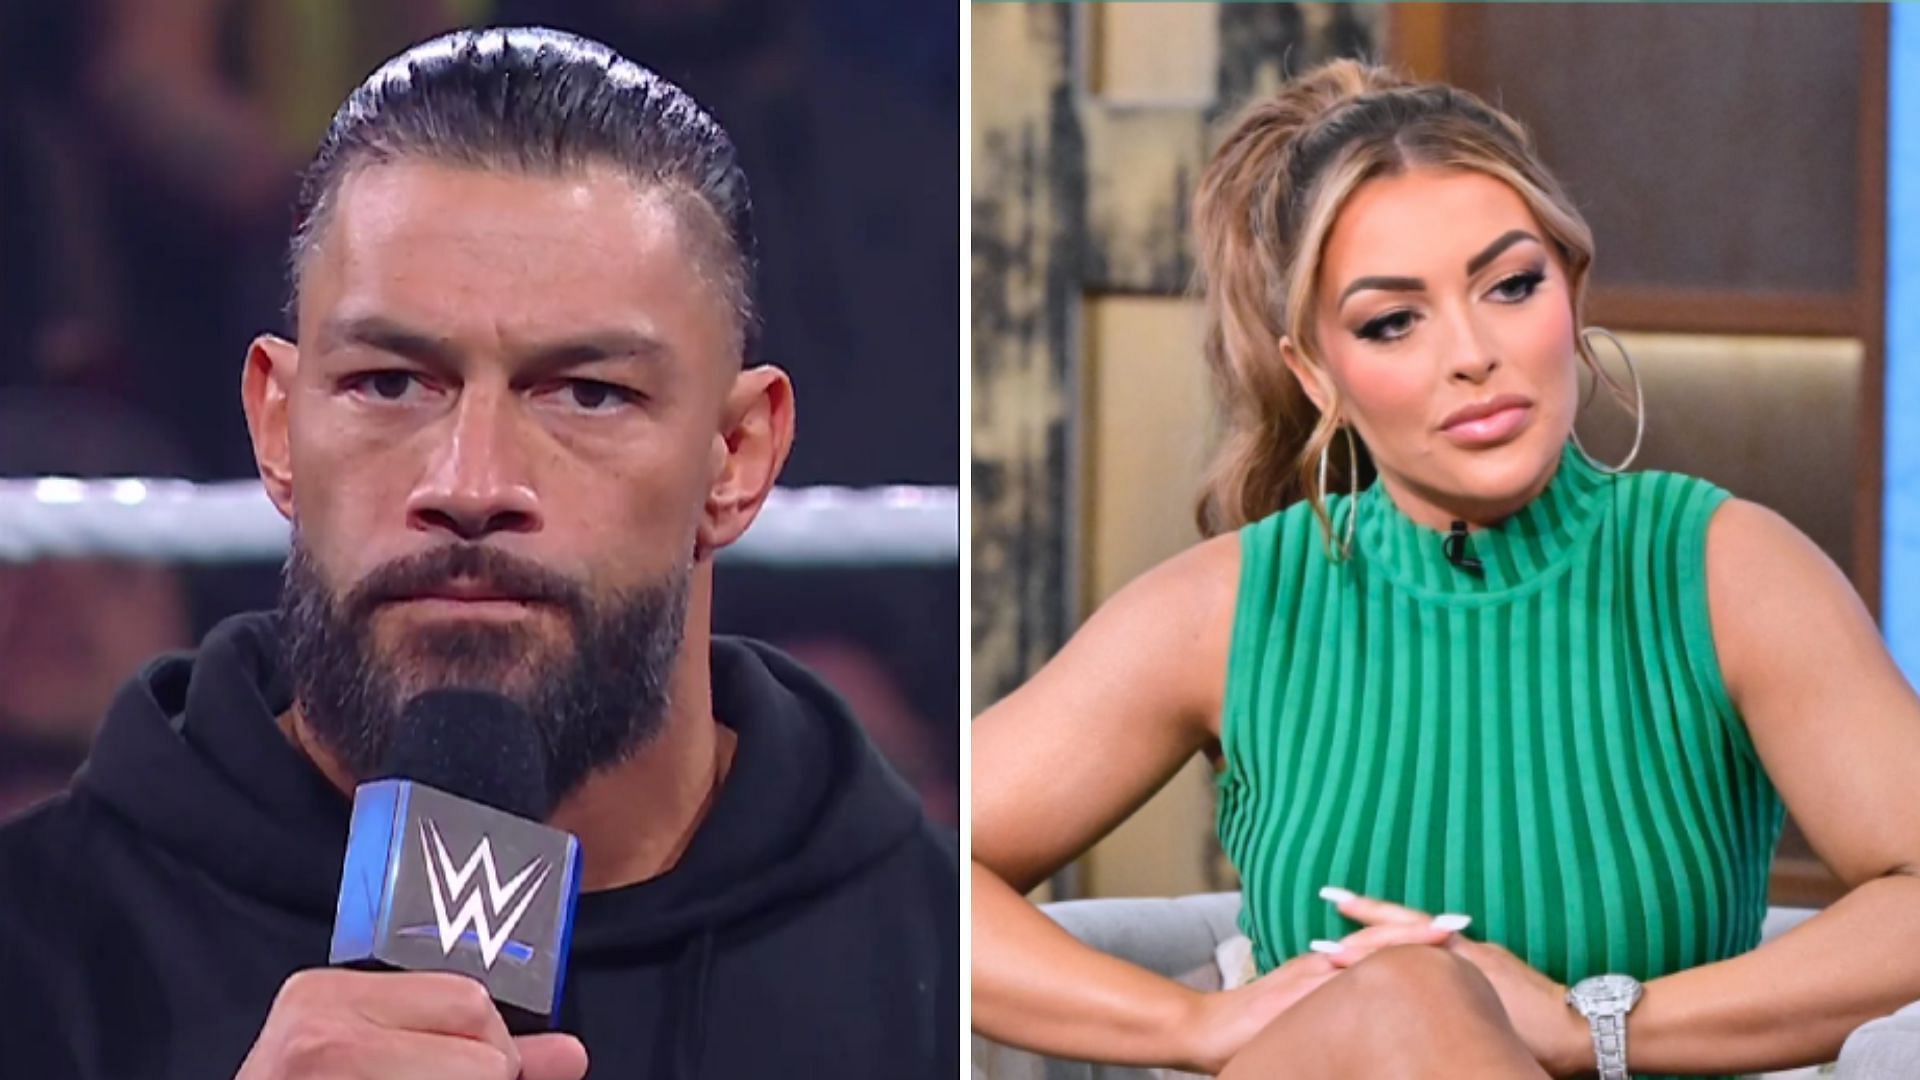 Roman Reigns on the left and Mandy Rose on the right [Image credits: stars